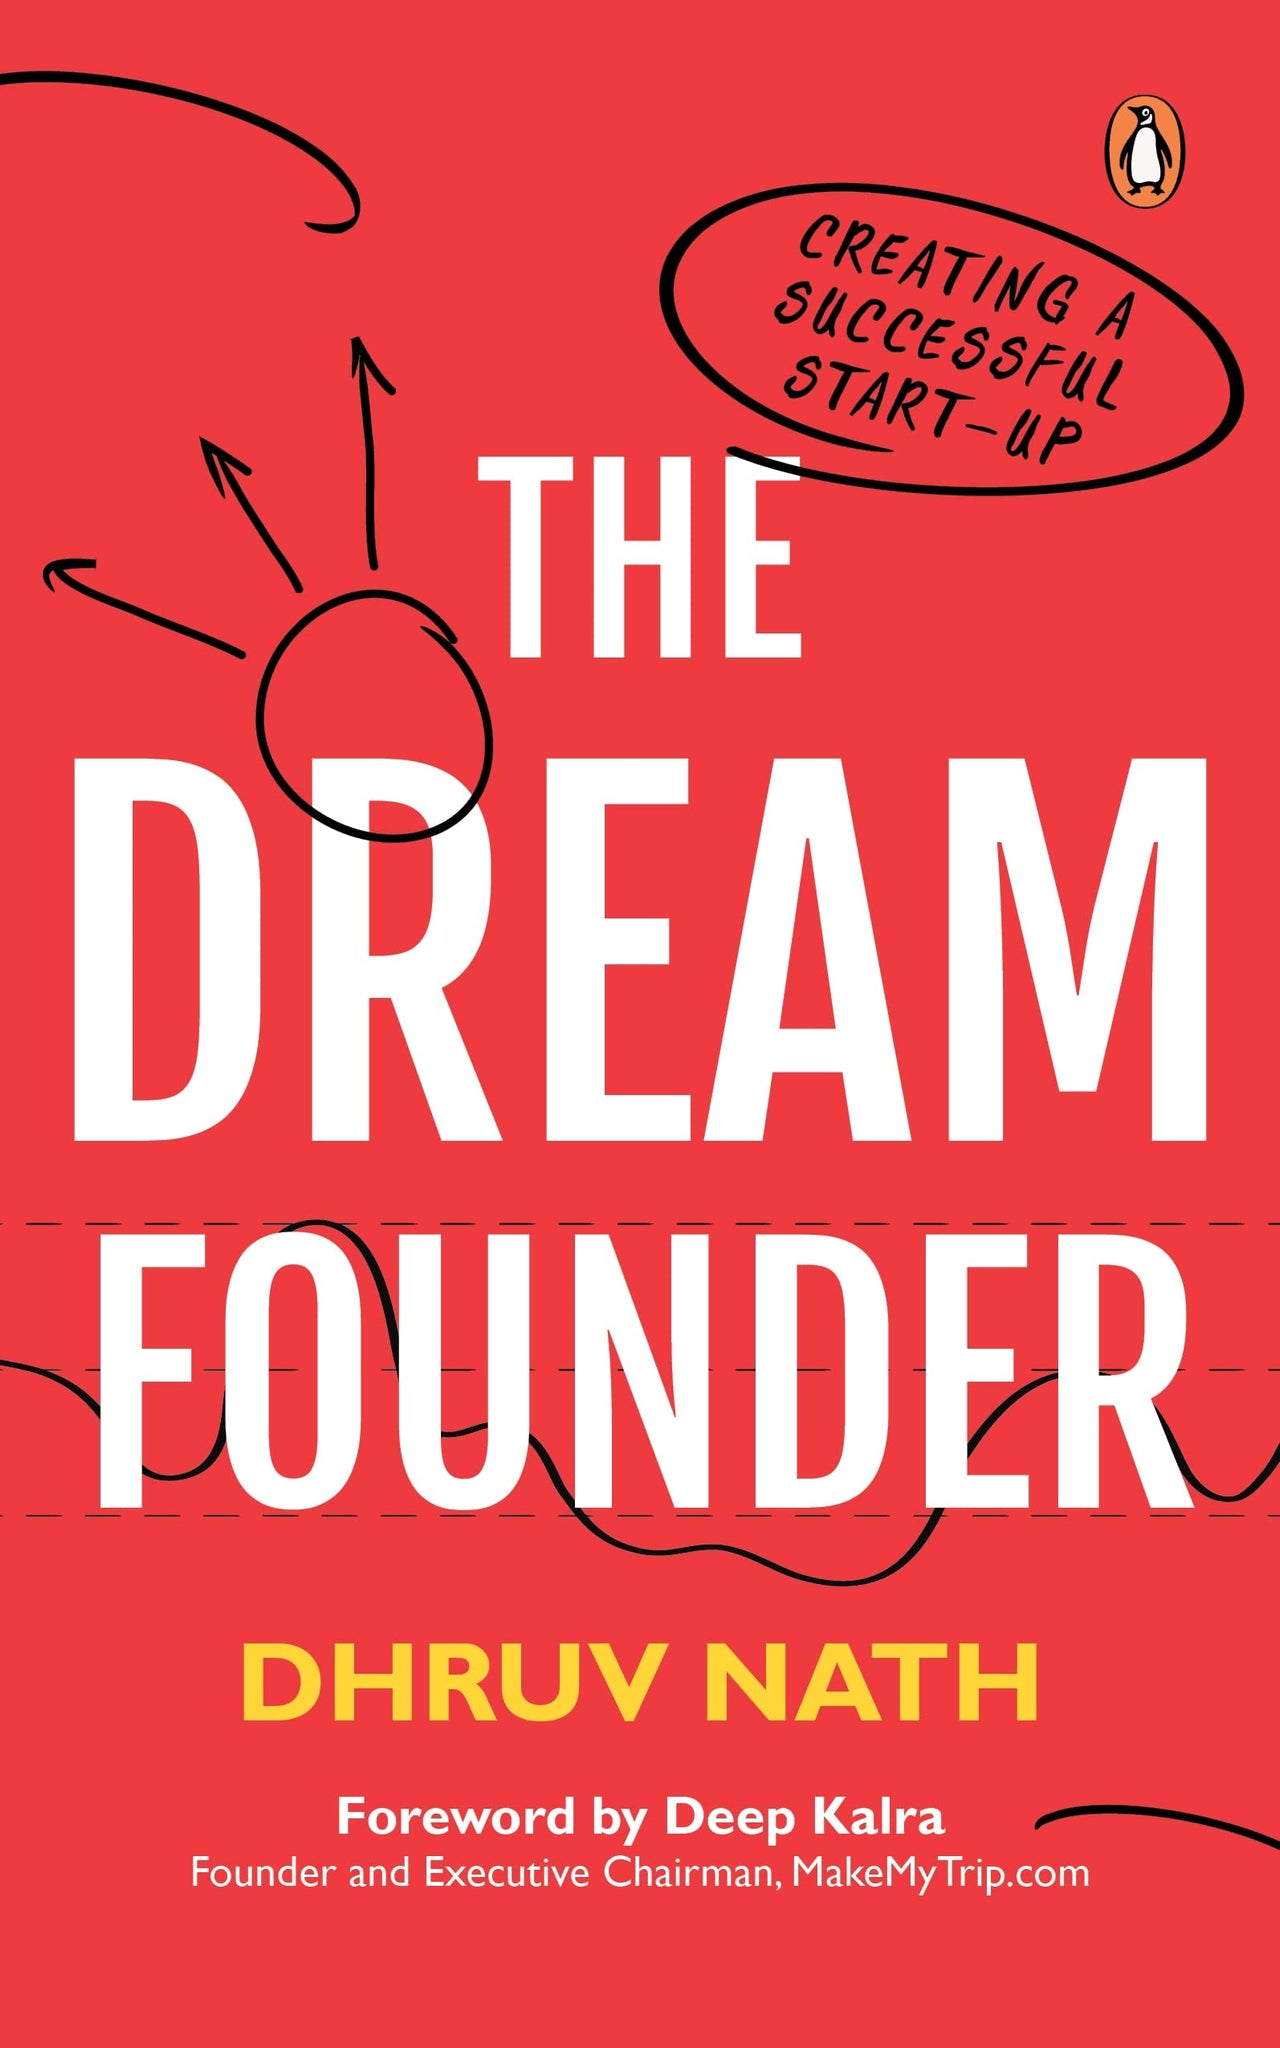 The Dream Founder: Creating A Successful Start-Up